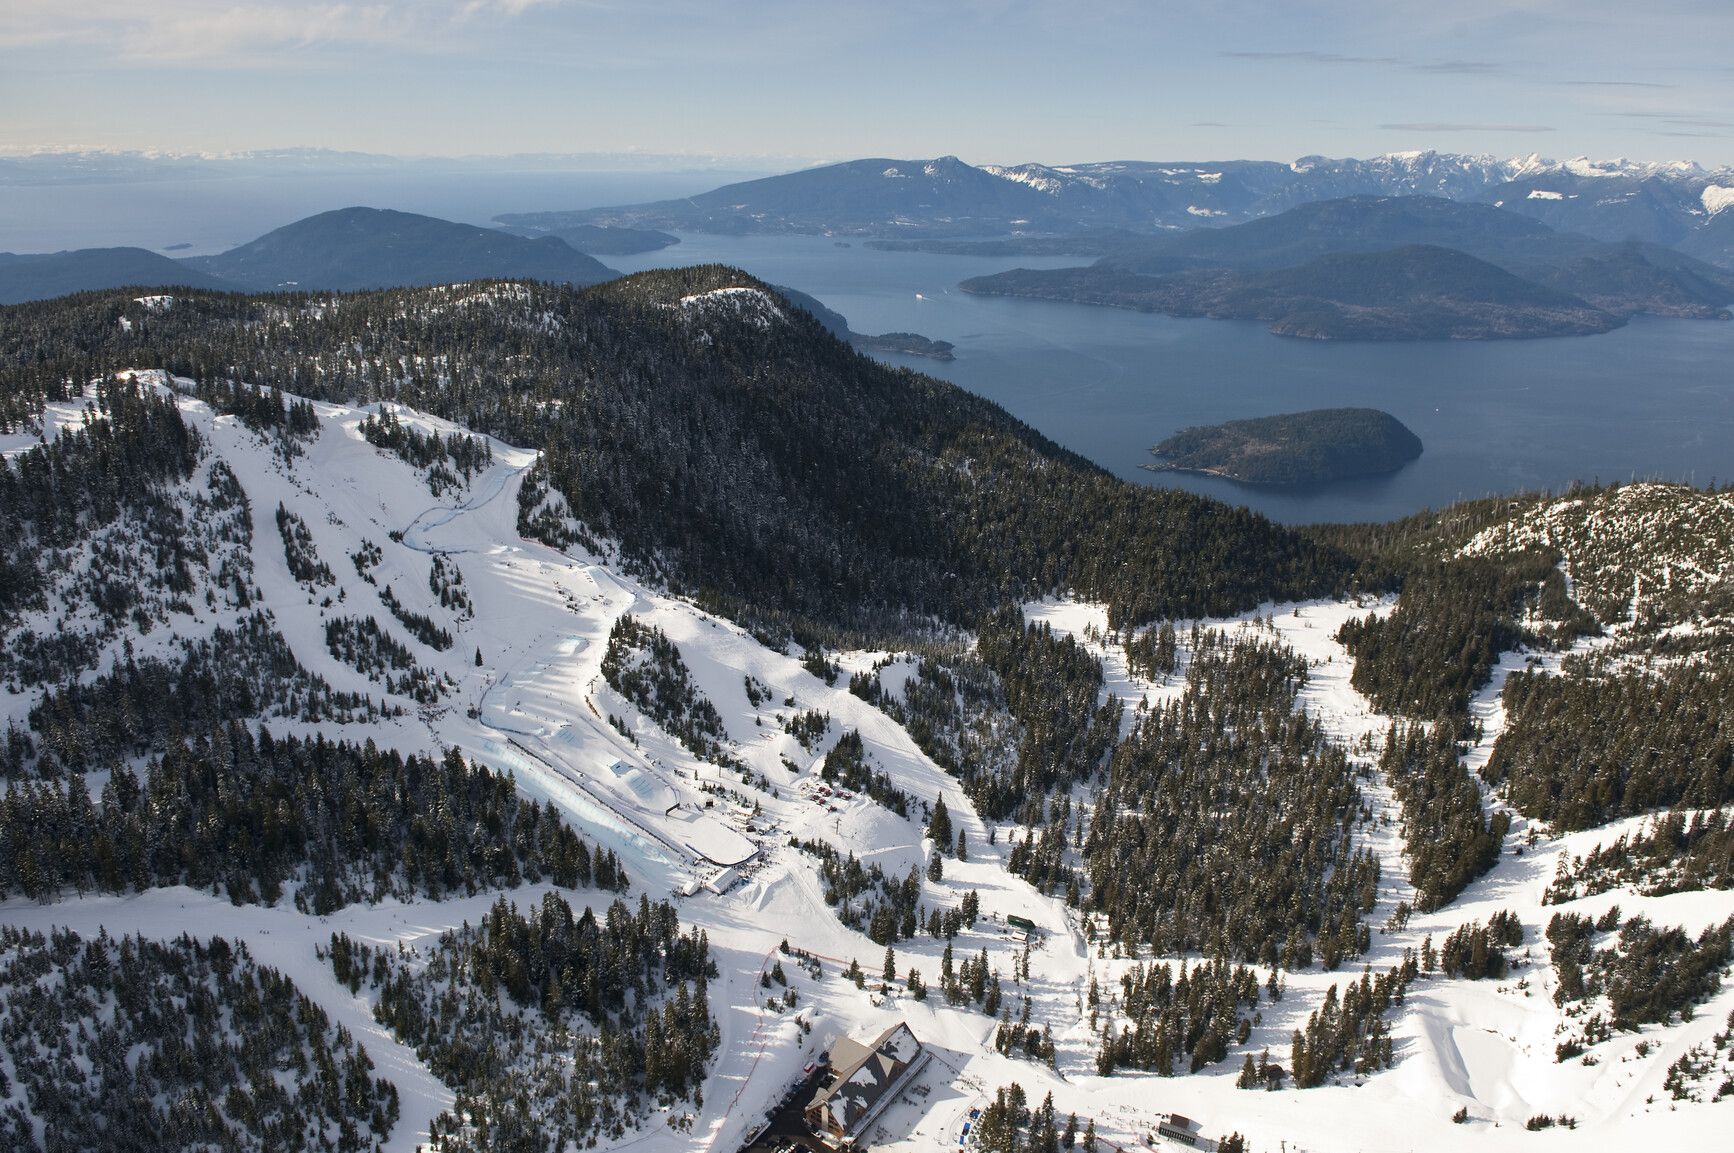 Aerial view of Cypress Mountain including the half pipe, &nbsp;ski cross, and snowboard cross track. The ocean and Howe Sound in the background. Credit Destination BC.